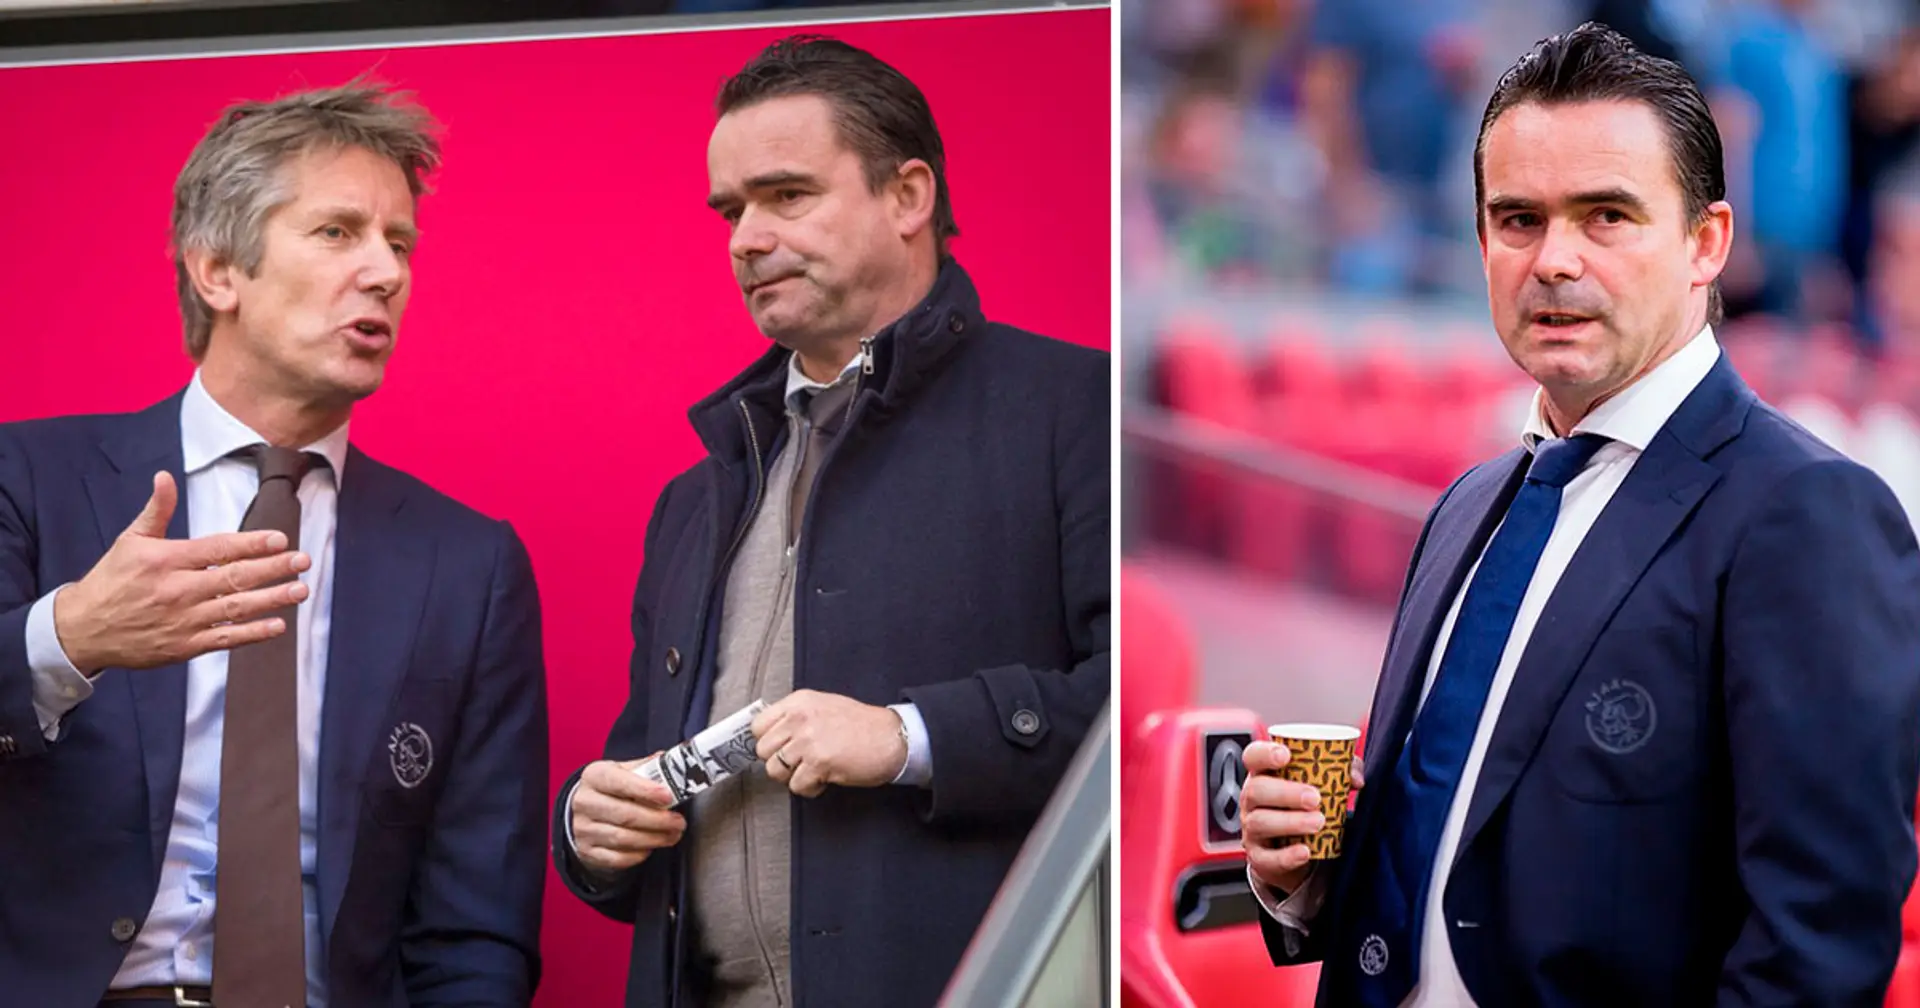 Ajax director Marc Overmars resigns after being caught sending sexually explicit messages to colleagues